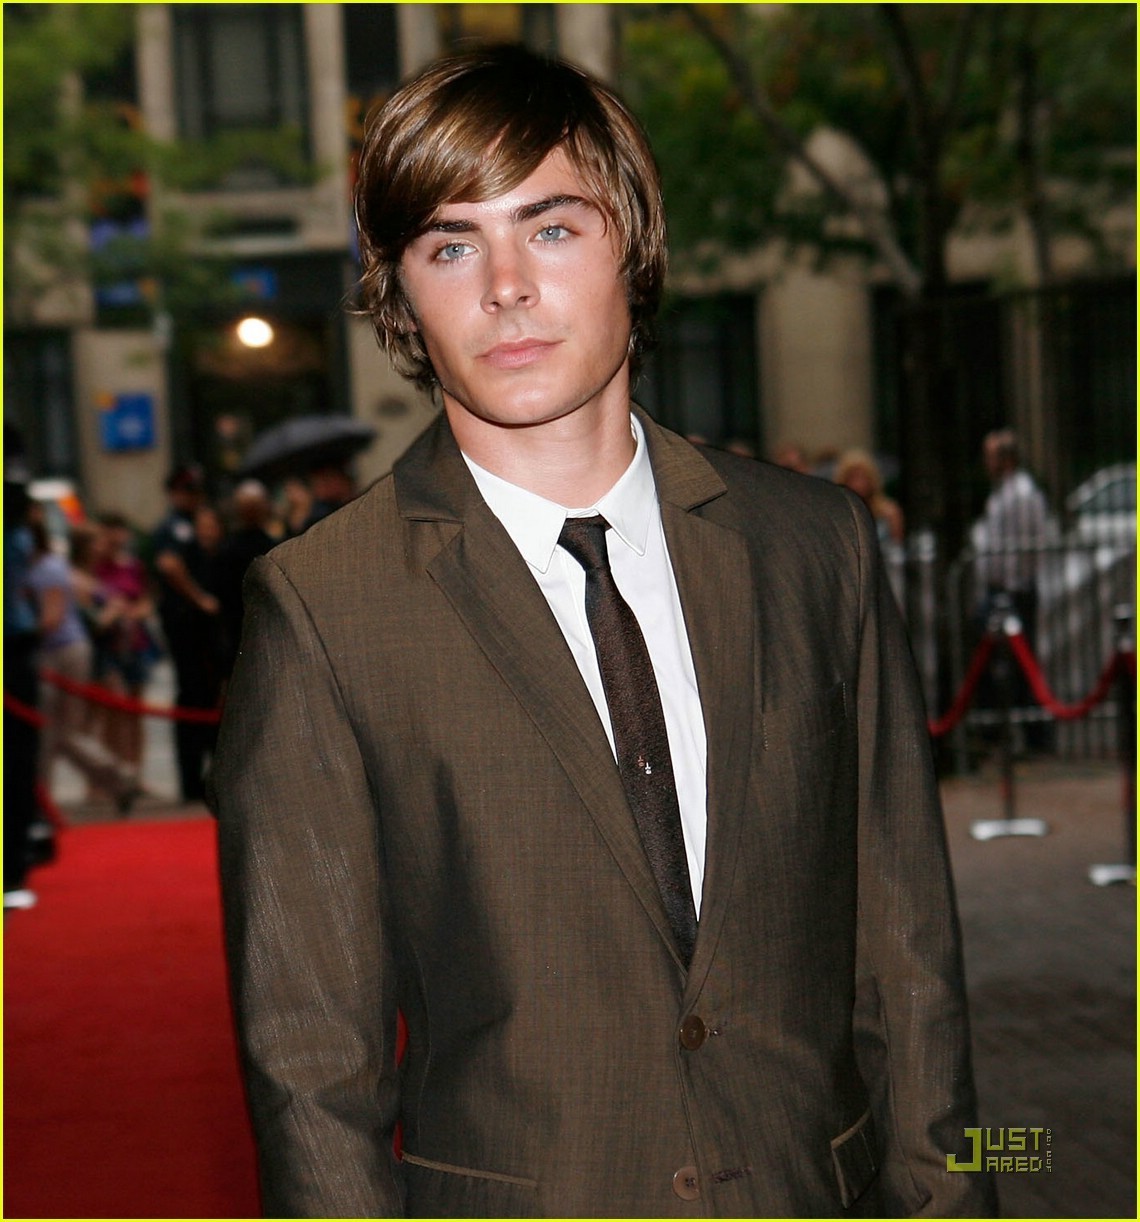 Photo of Zac for fans of Zac Efron. 